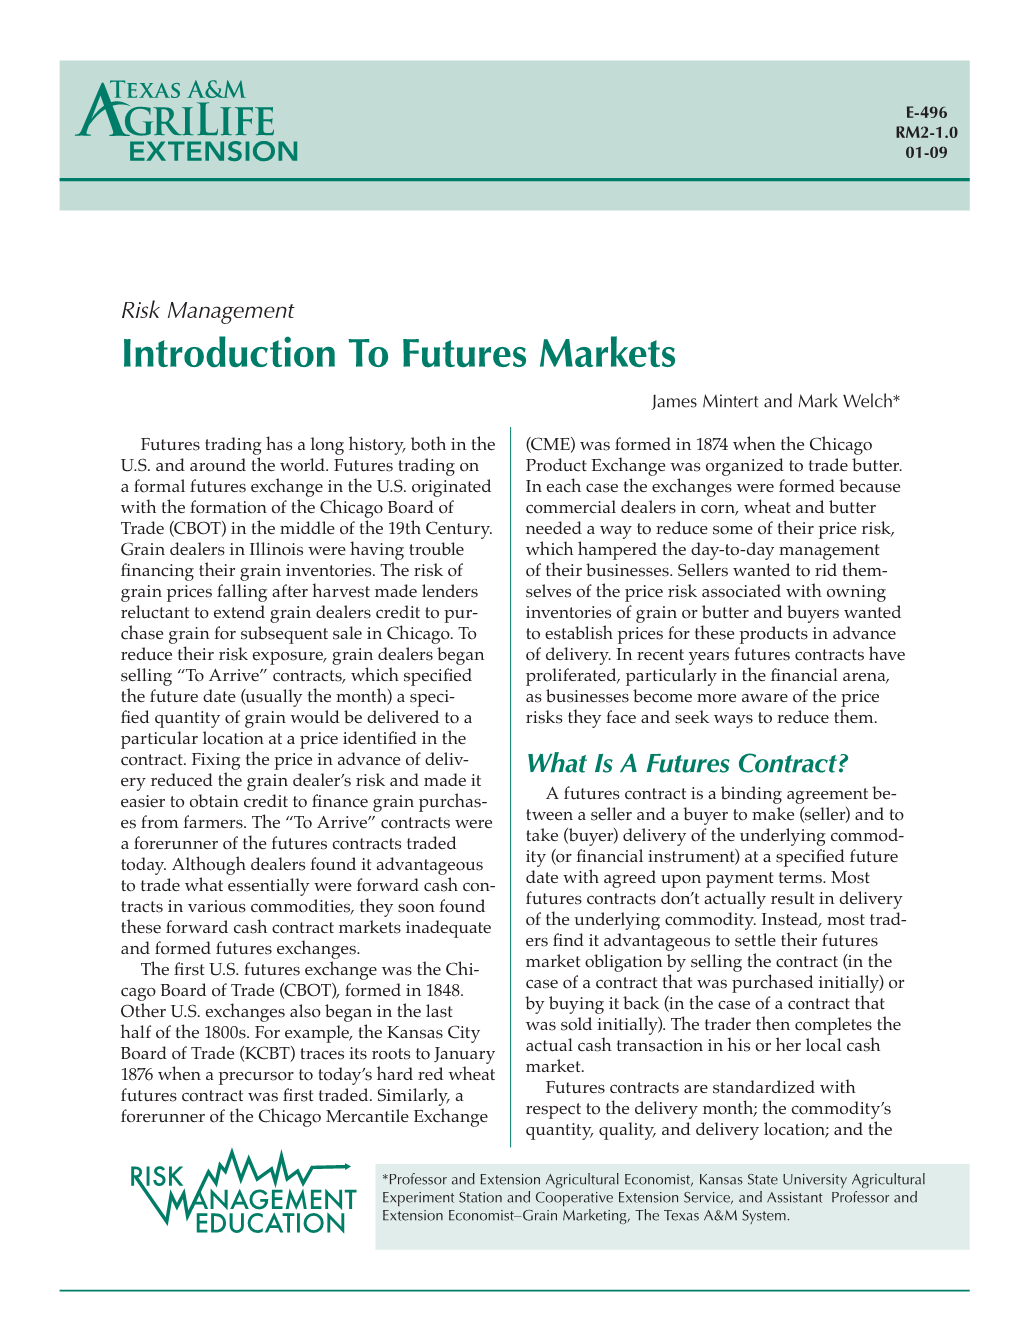 Introduction to Futures Markets James Mintert and Mark Welch*